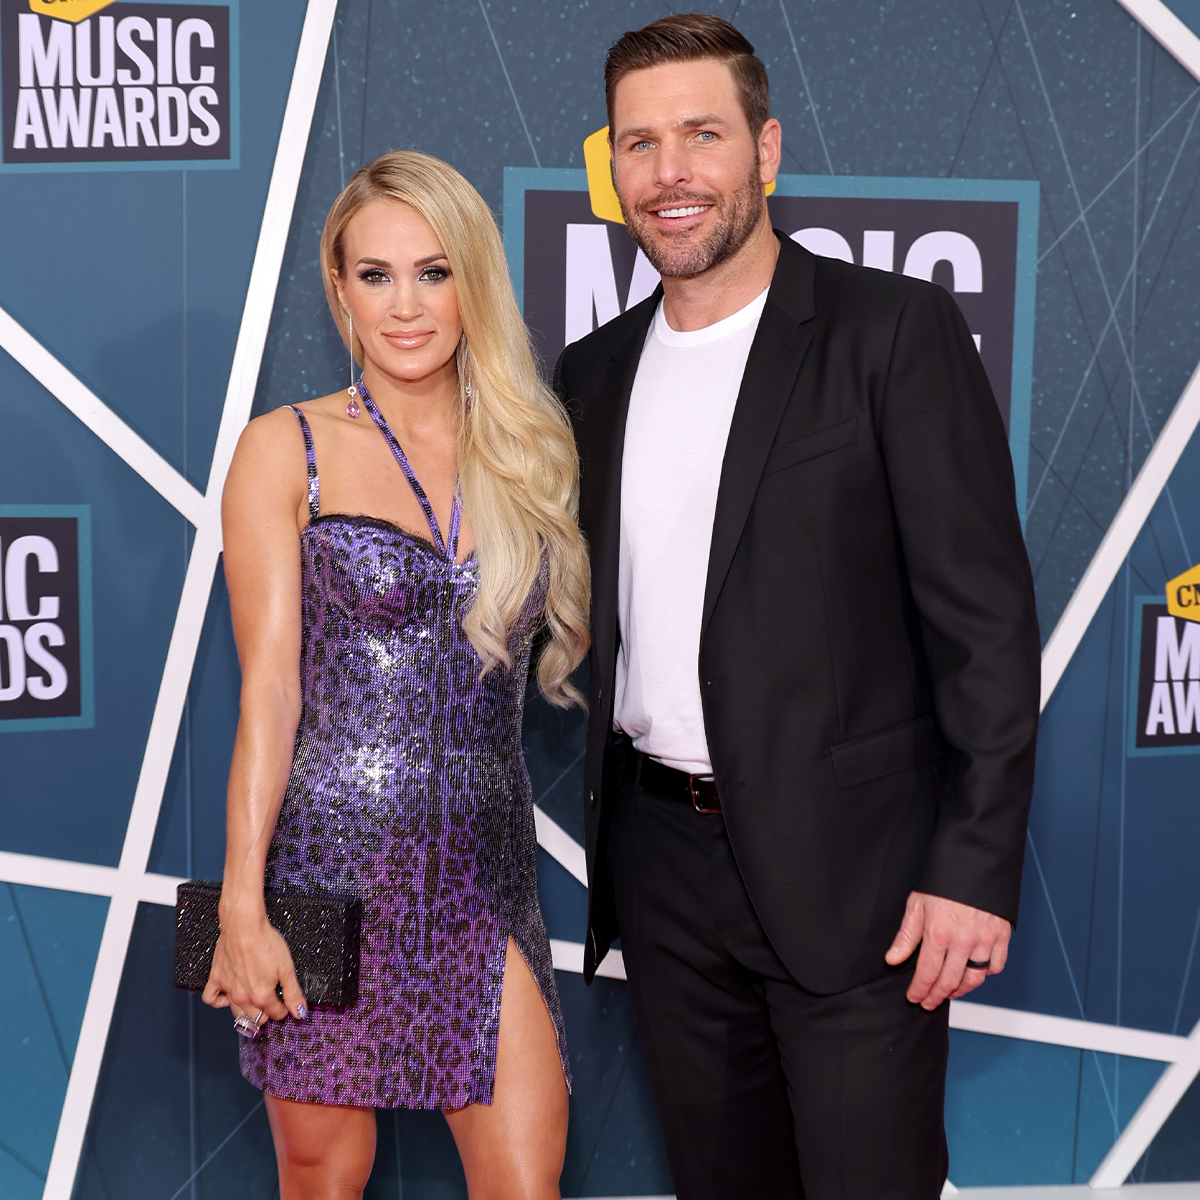 Carrie Underwood shares photo of son Isaiah and husband Mike Fisher